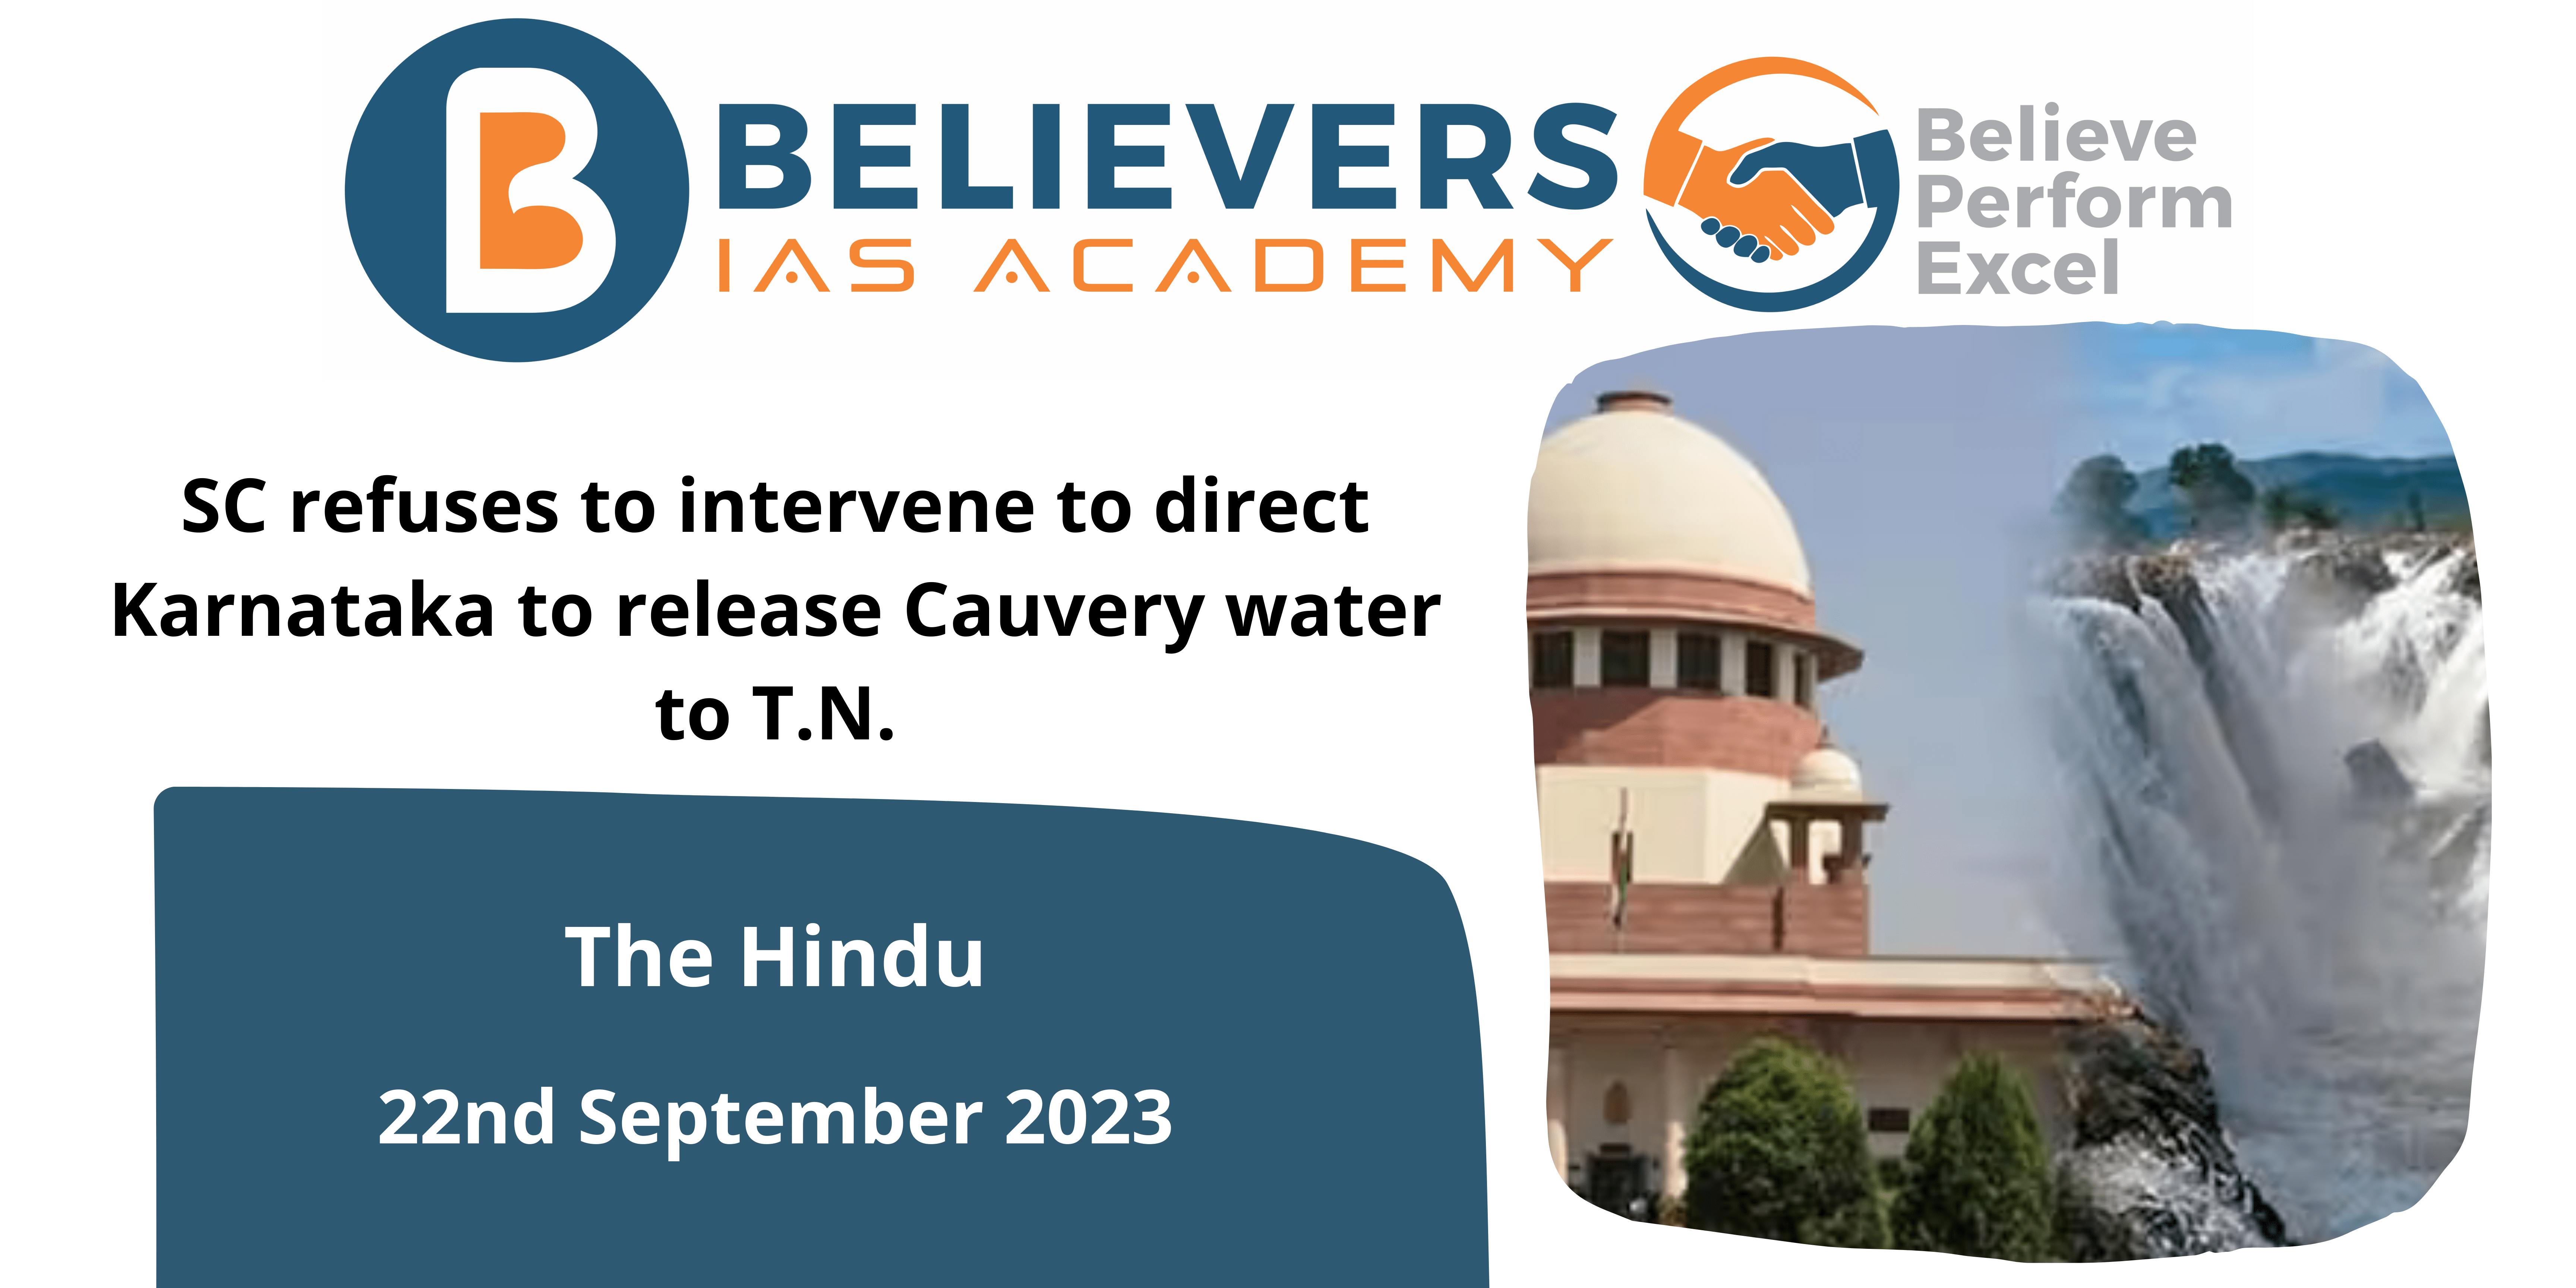 SC refuses to intervene to direct Karnataka to release Cauvery water to T.N.